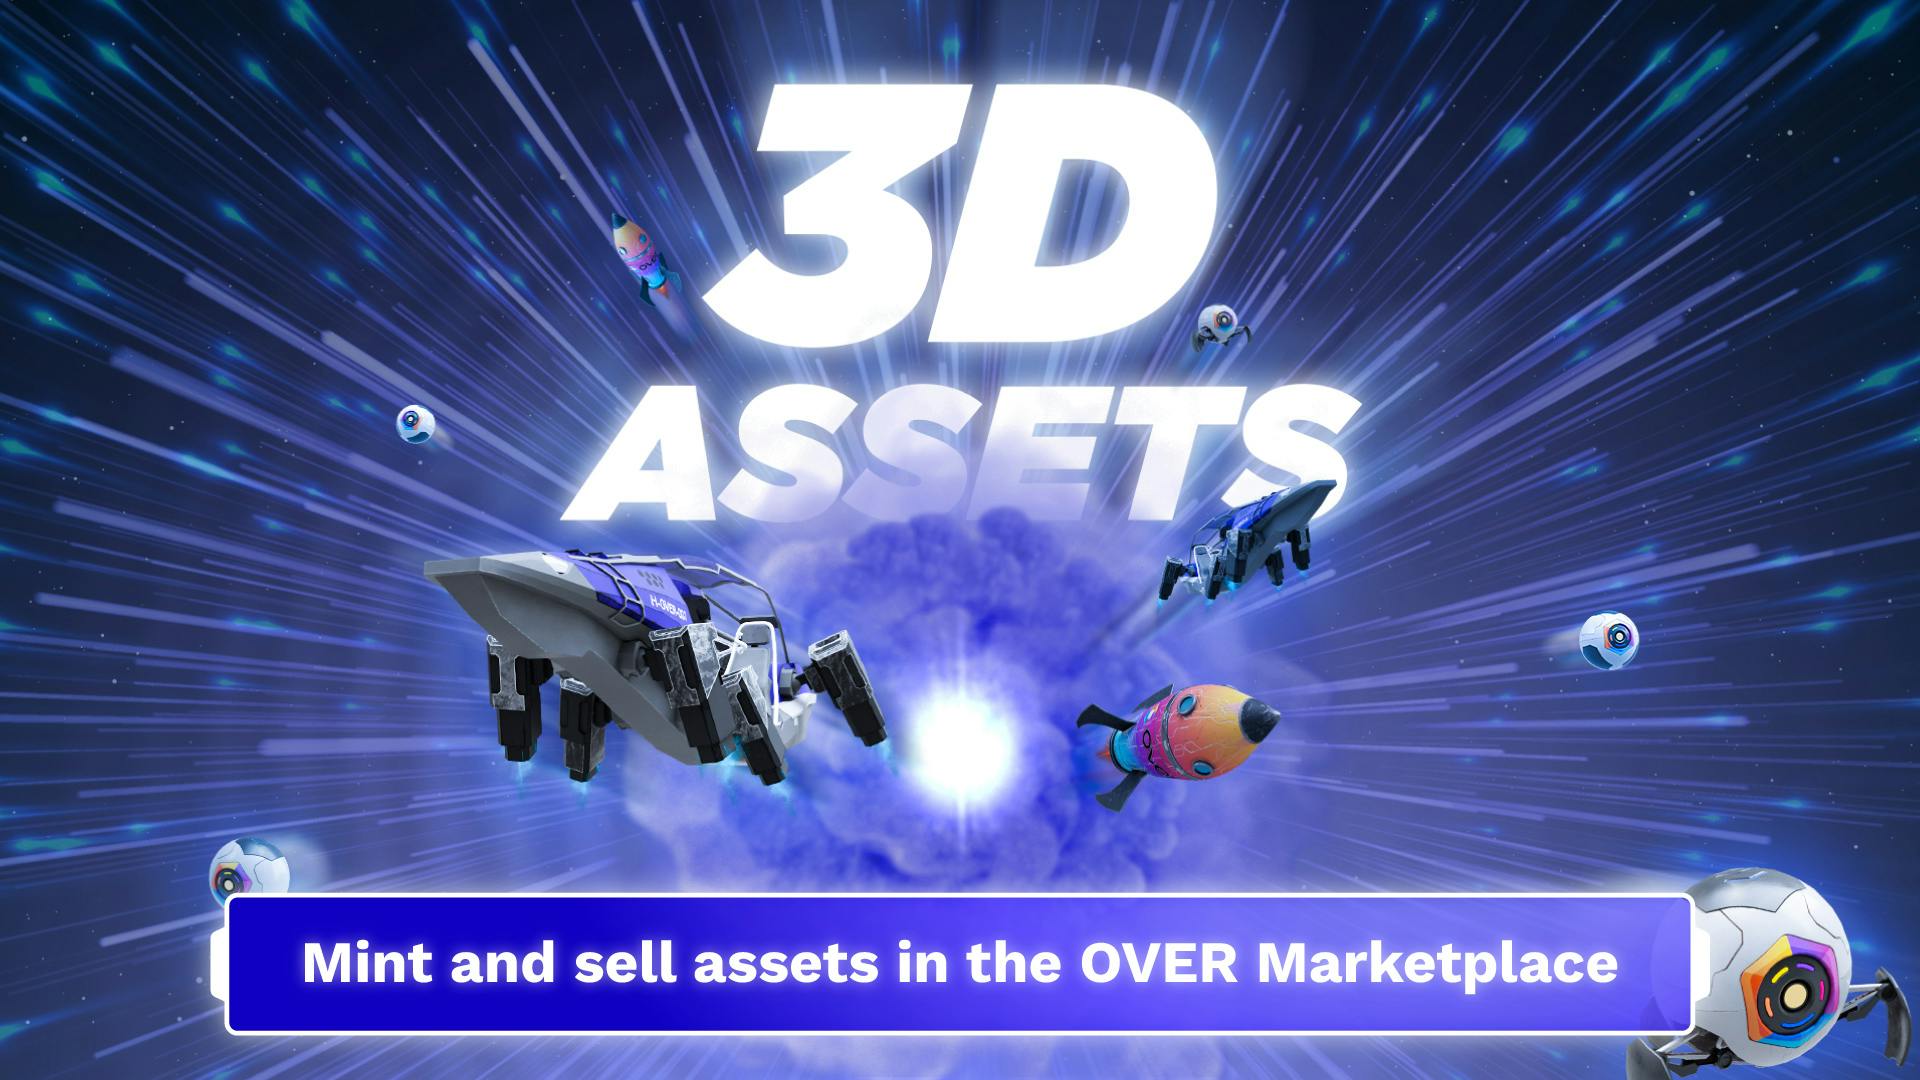 3D digital assets can now be minted and sold on the OVER Marketplace